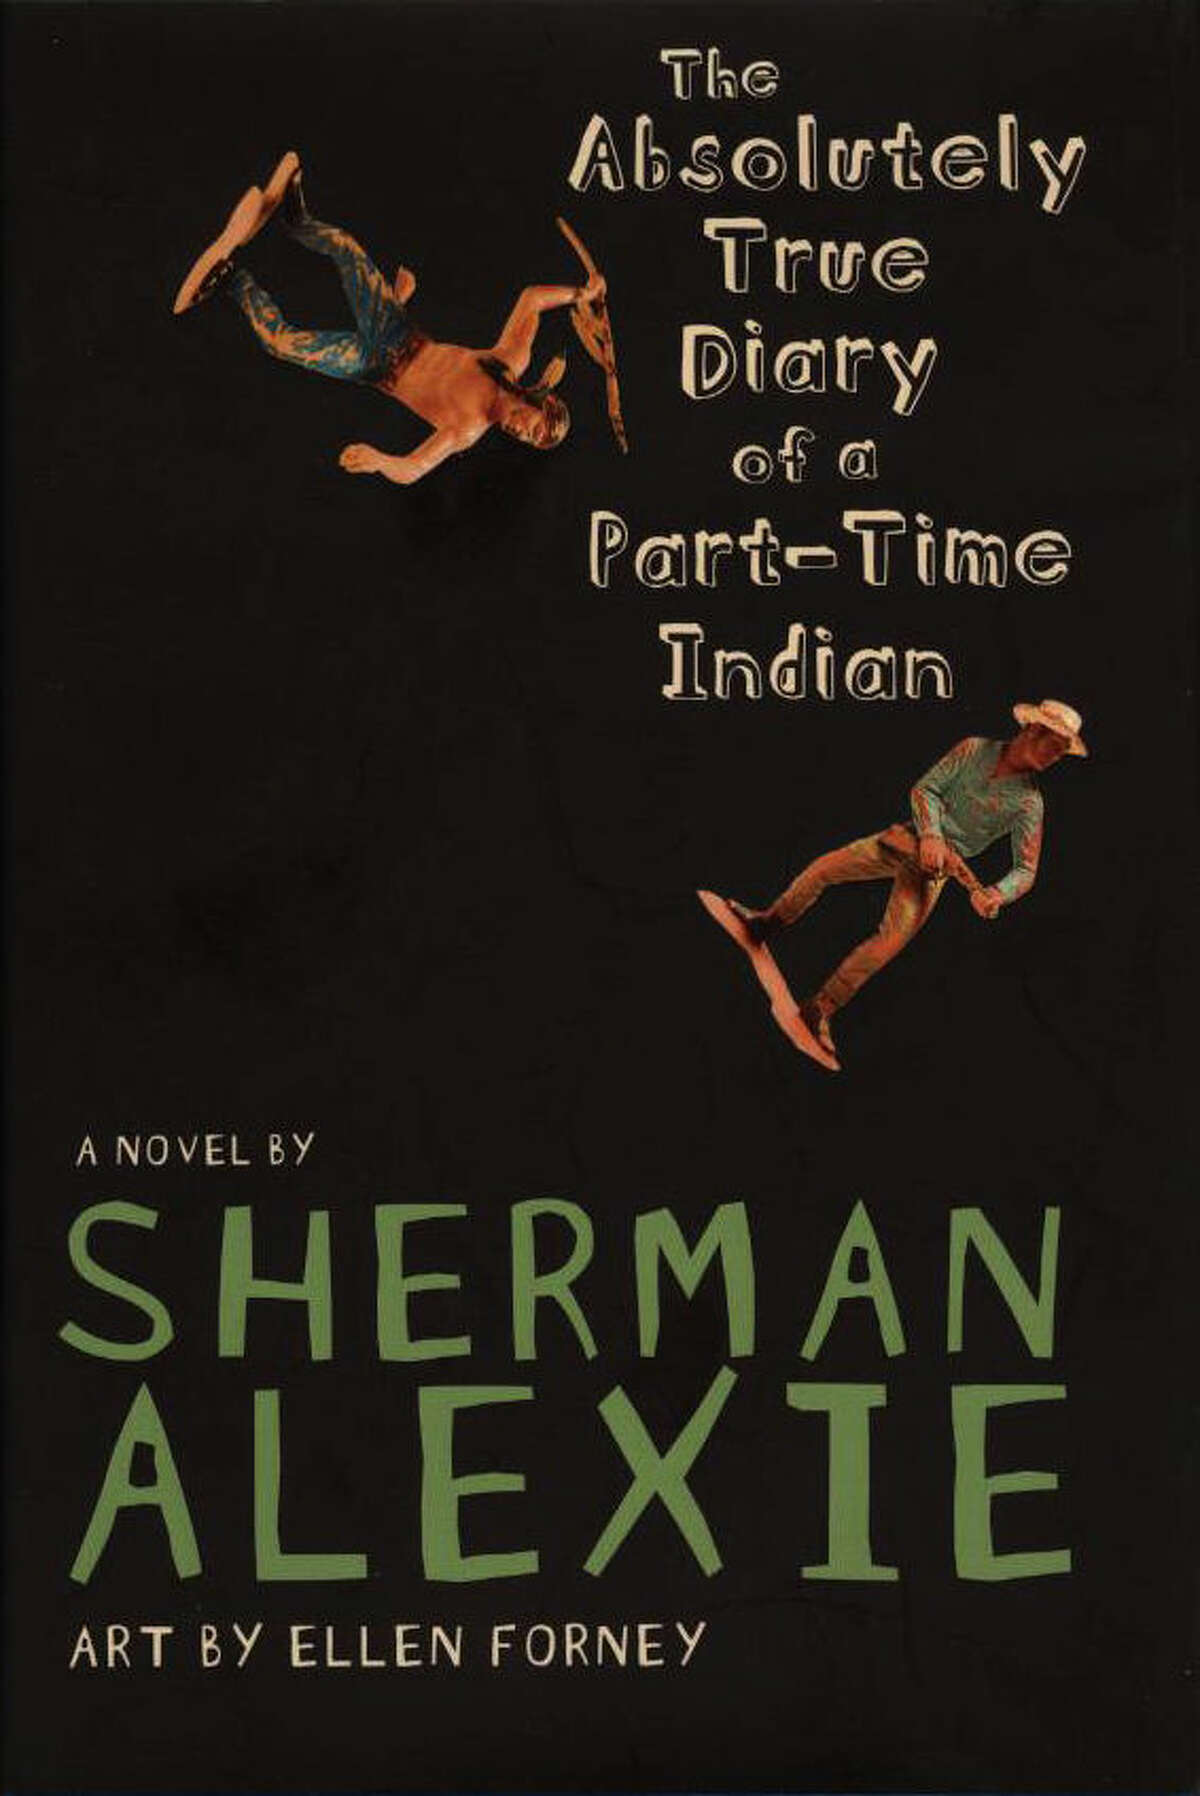 "The Absolutely True Diary of a Part-Time Indian"